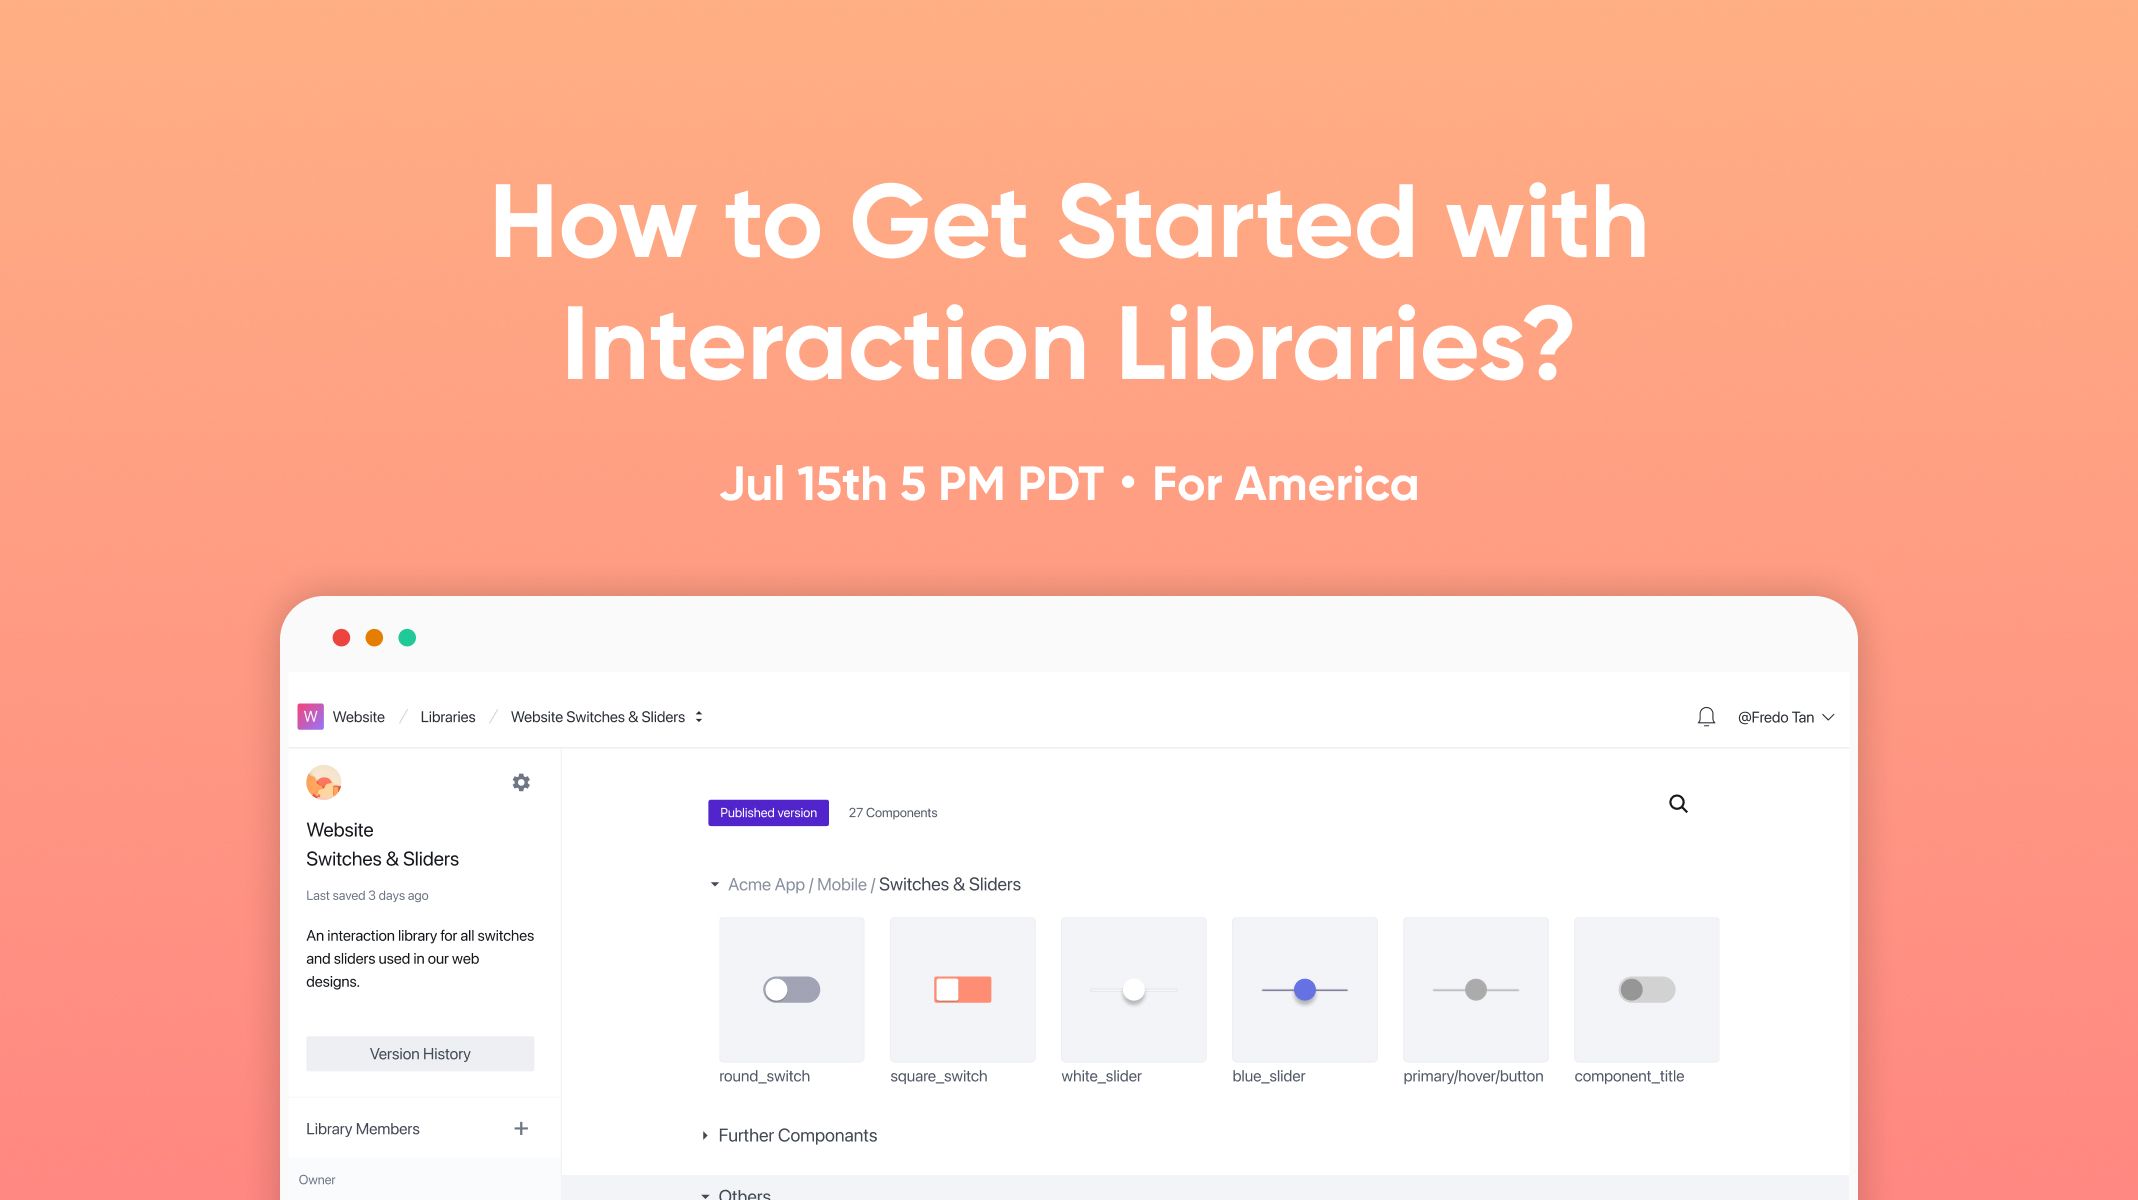 Get started with interaction libraries workshop thumbnail